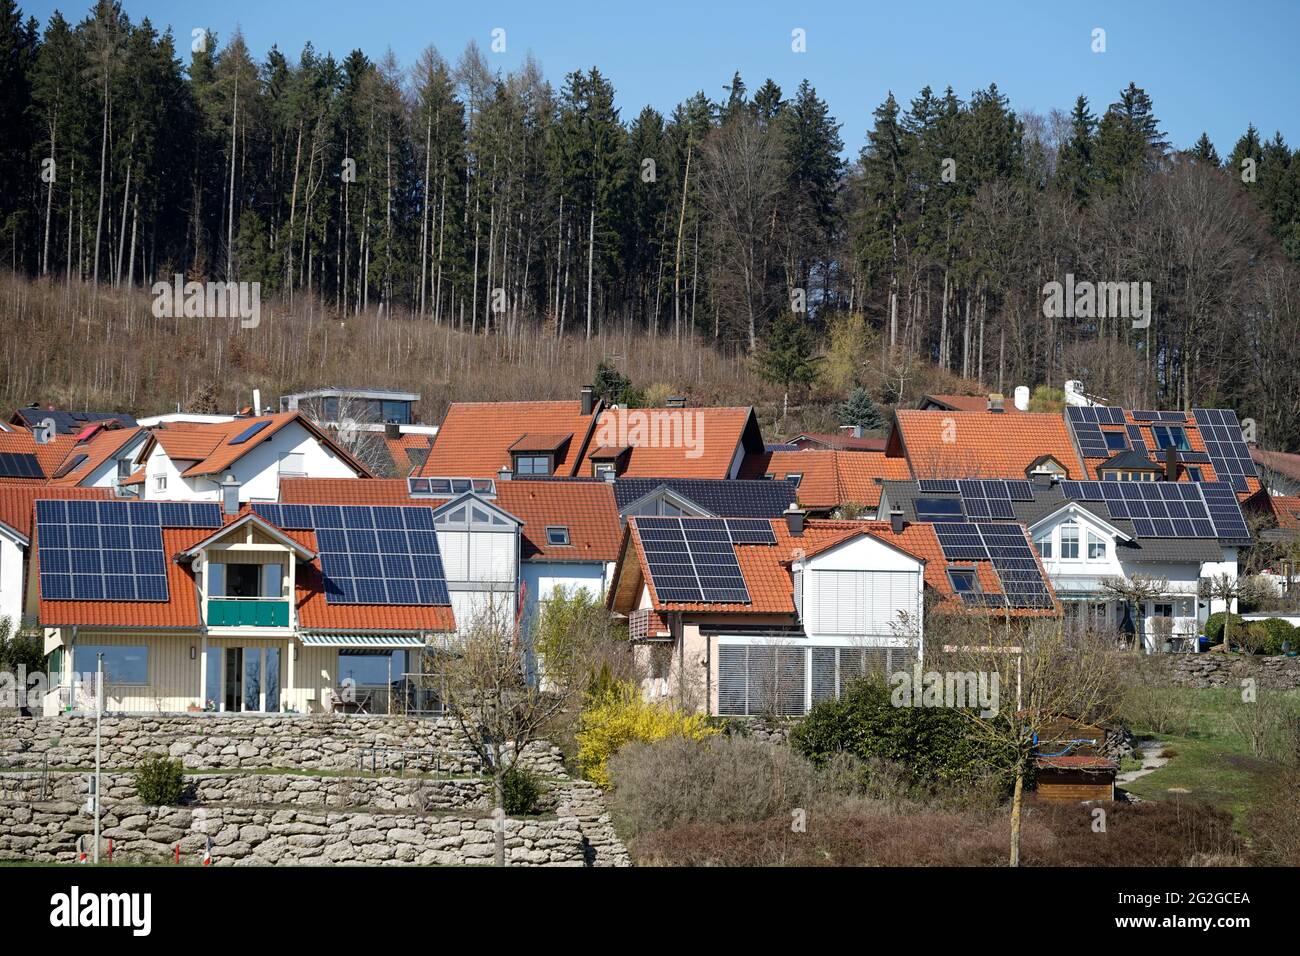 Germany, Bavaria, Upper Bavaria, Burghausen, single-family houses, roofs with photovoltaic systems Stock Photo